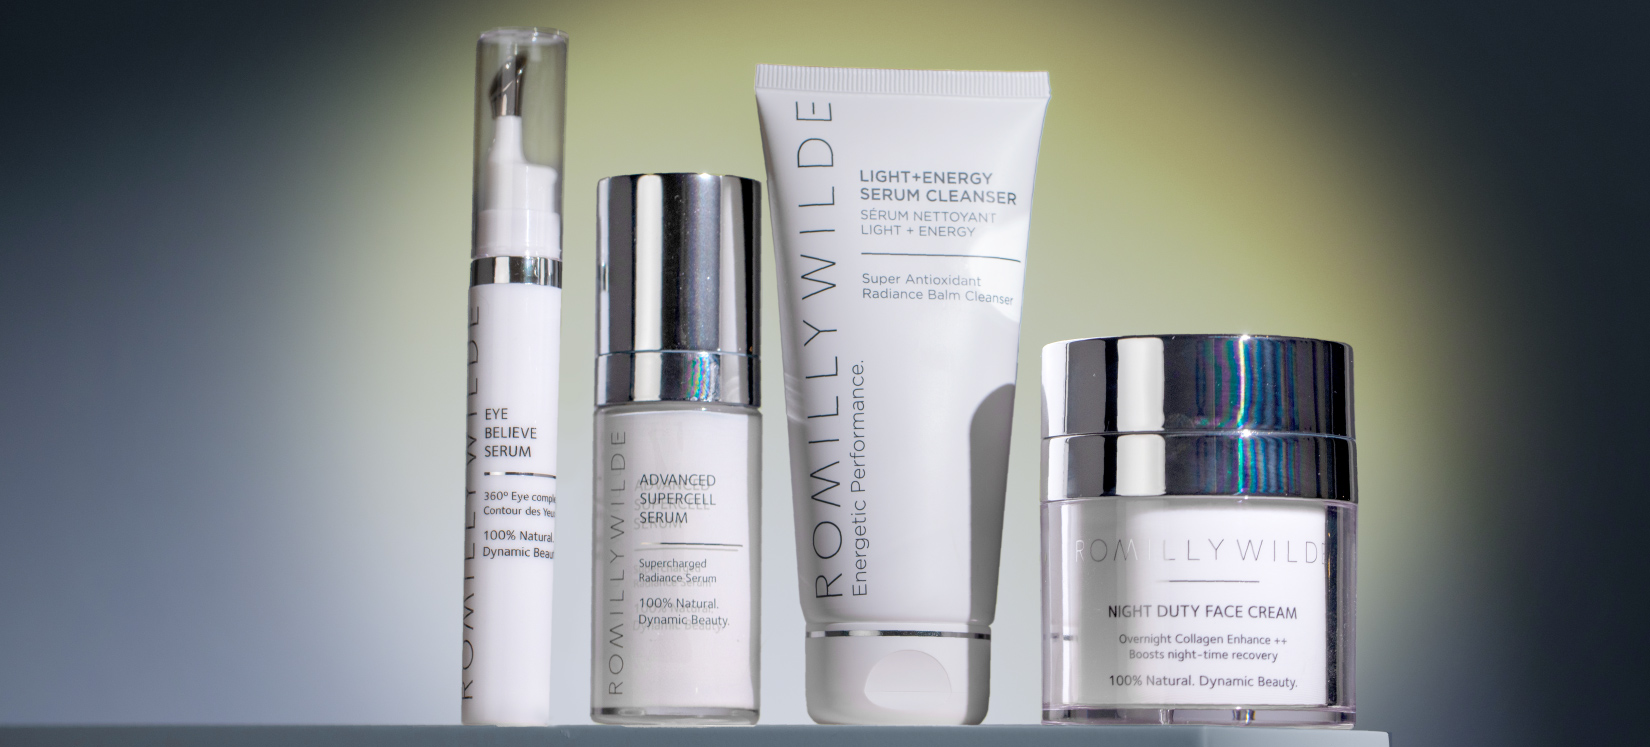 Evening Skin Set Line of Romilly Wilde Products